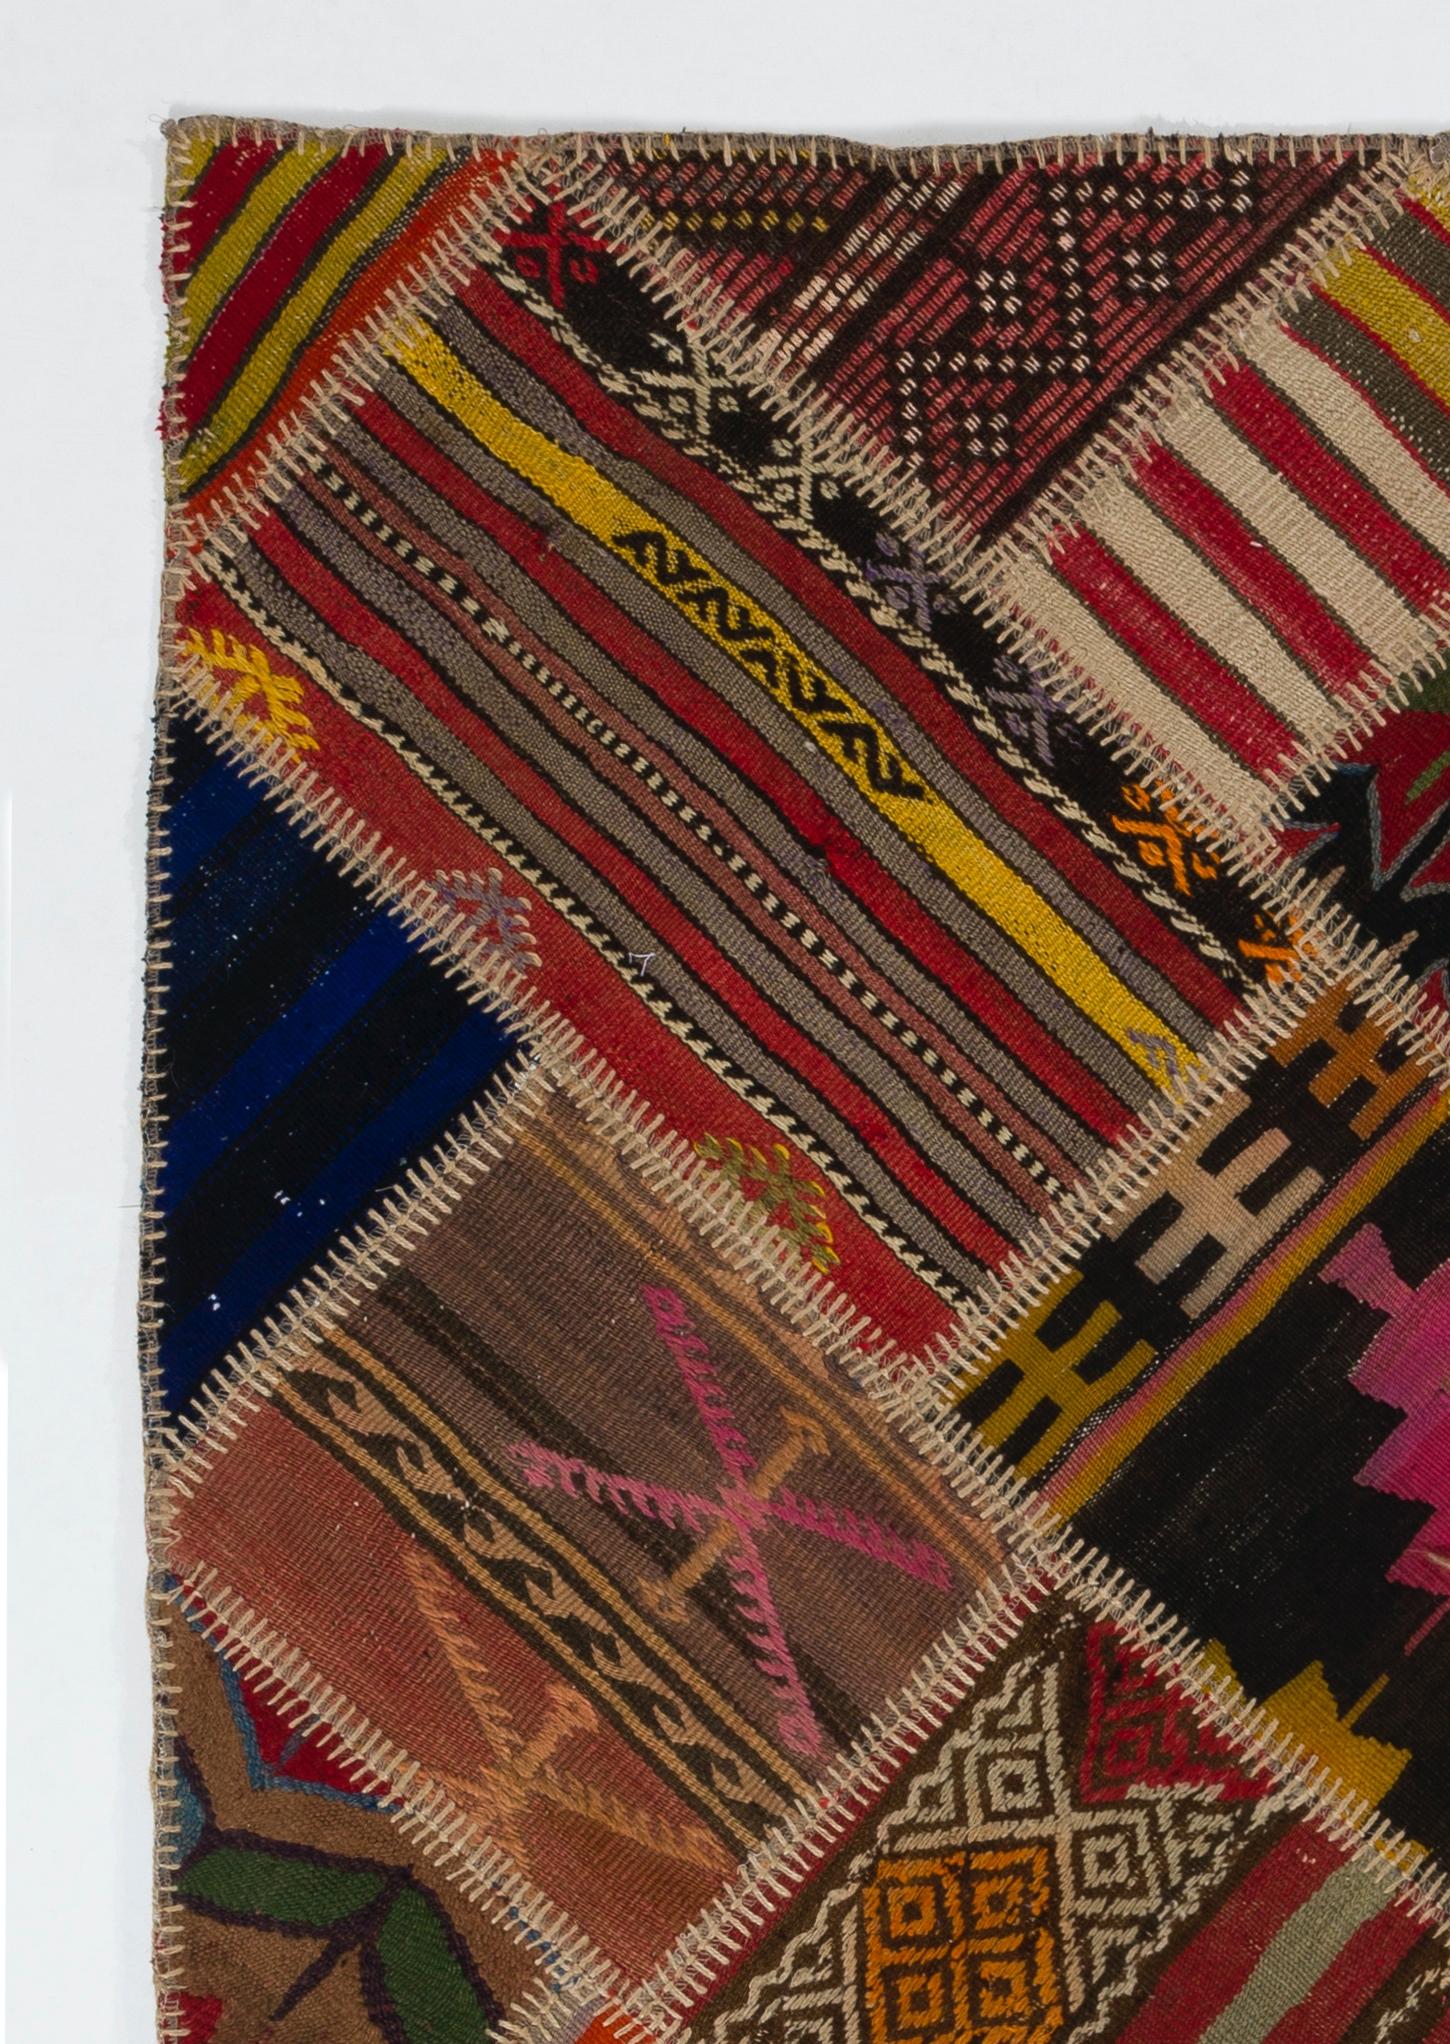 This patchwork rug is handmade from assorted pieces of vintage Turkish Kilims (flat-woven rugs), it is reinforced with a durable cotton twill/underlay stitched on the back for a smooth finish and extra thickness. 

The kilims used in making this rug